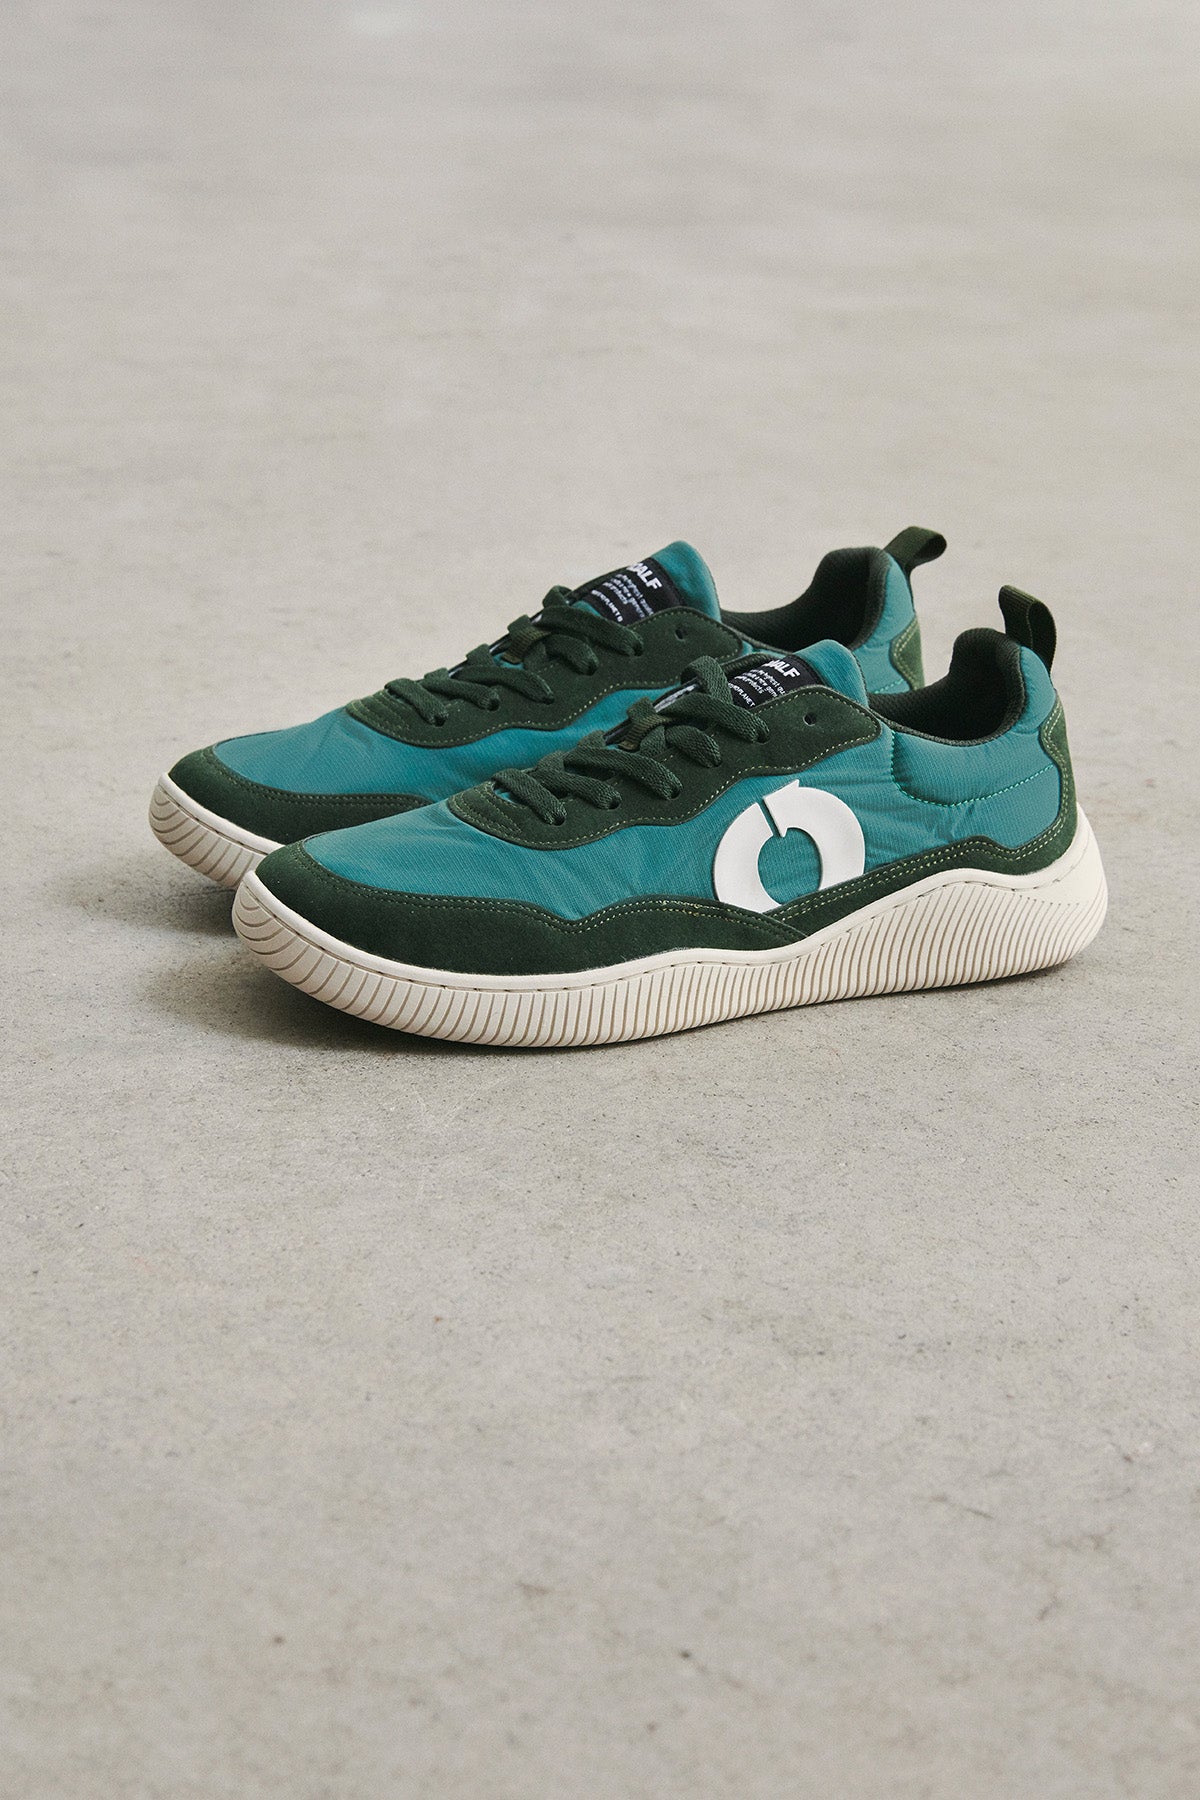 GREEN ALCUDIANY TRAINERS